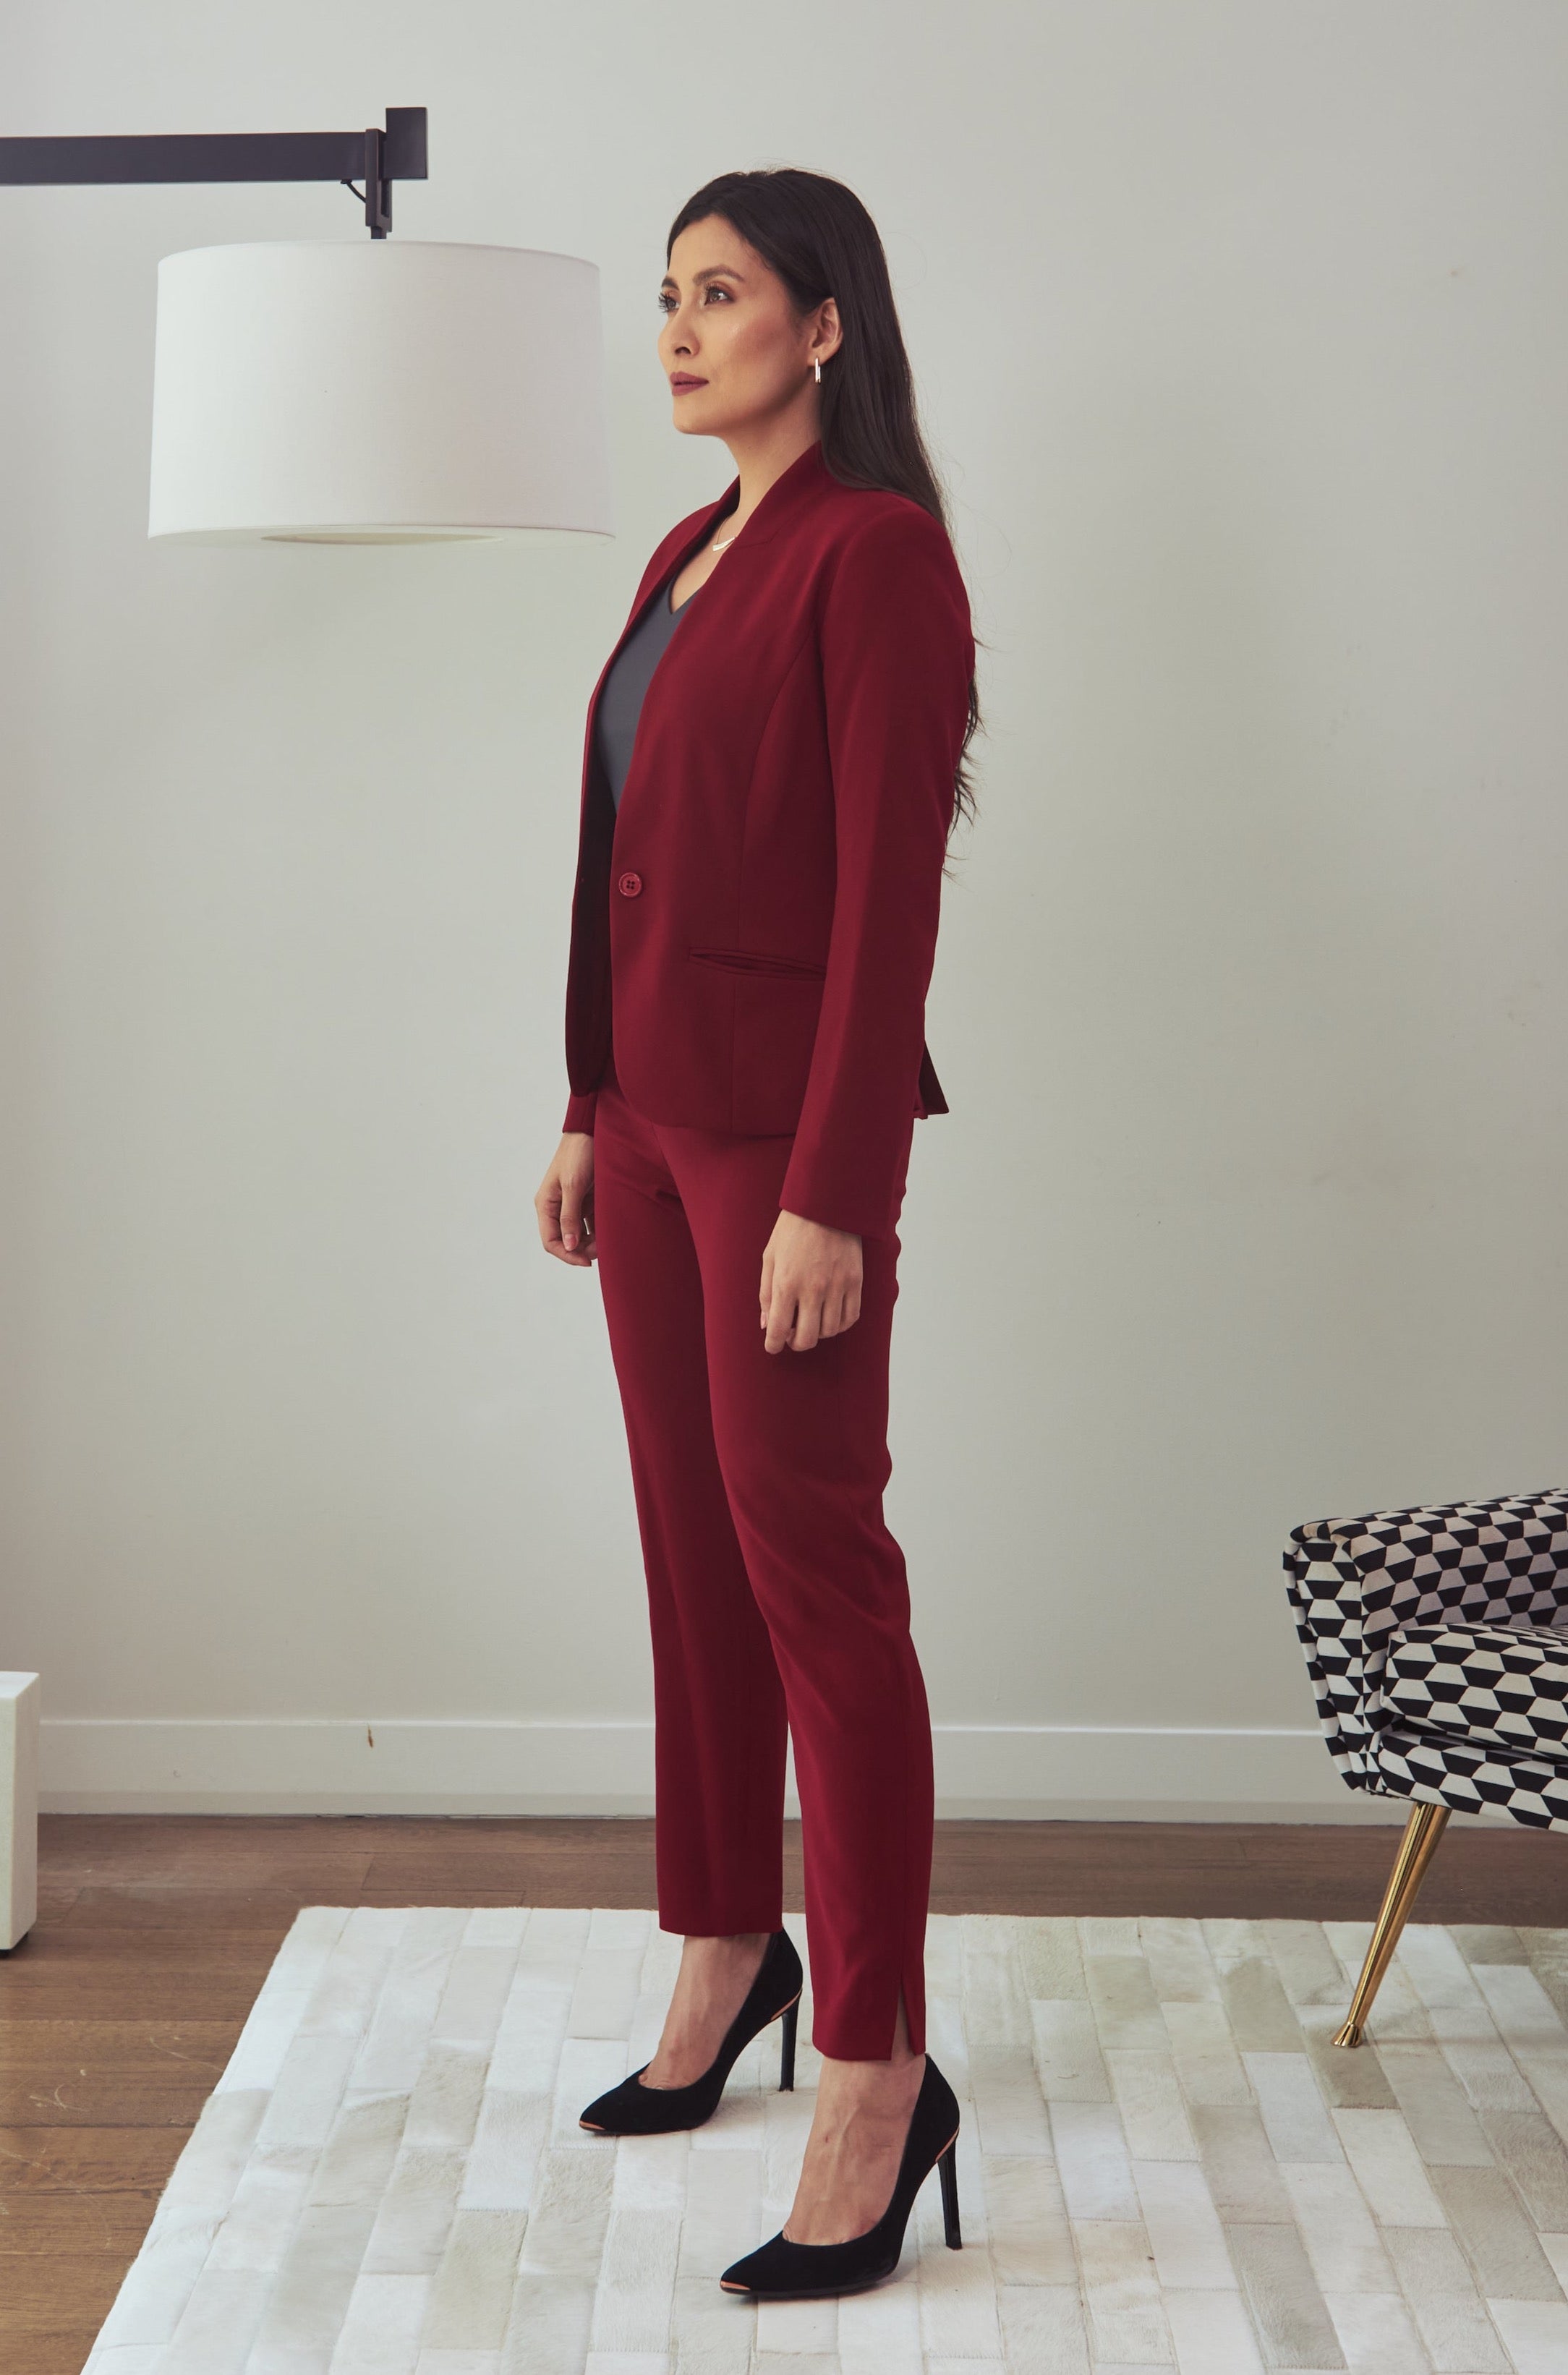 Women' Business Audrey Pant - Merlot NORA GARDNER | OFFICIAL STORE for work and office